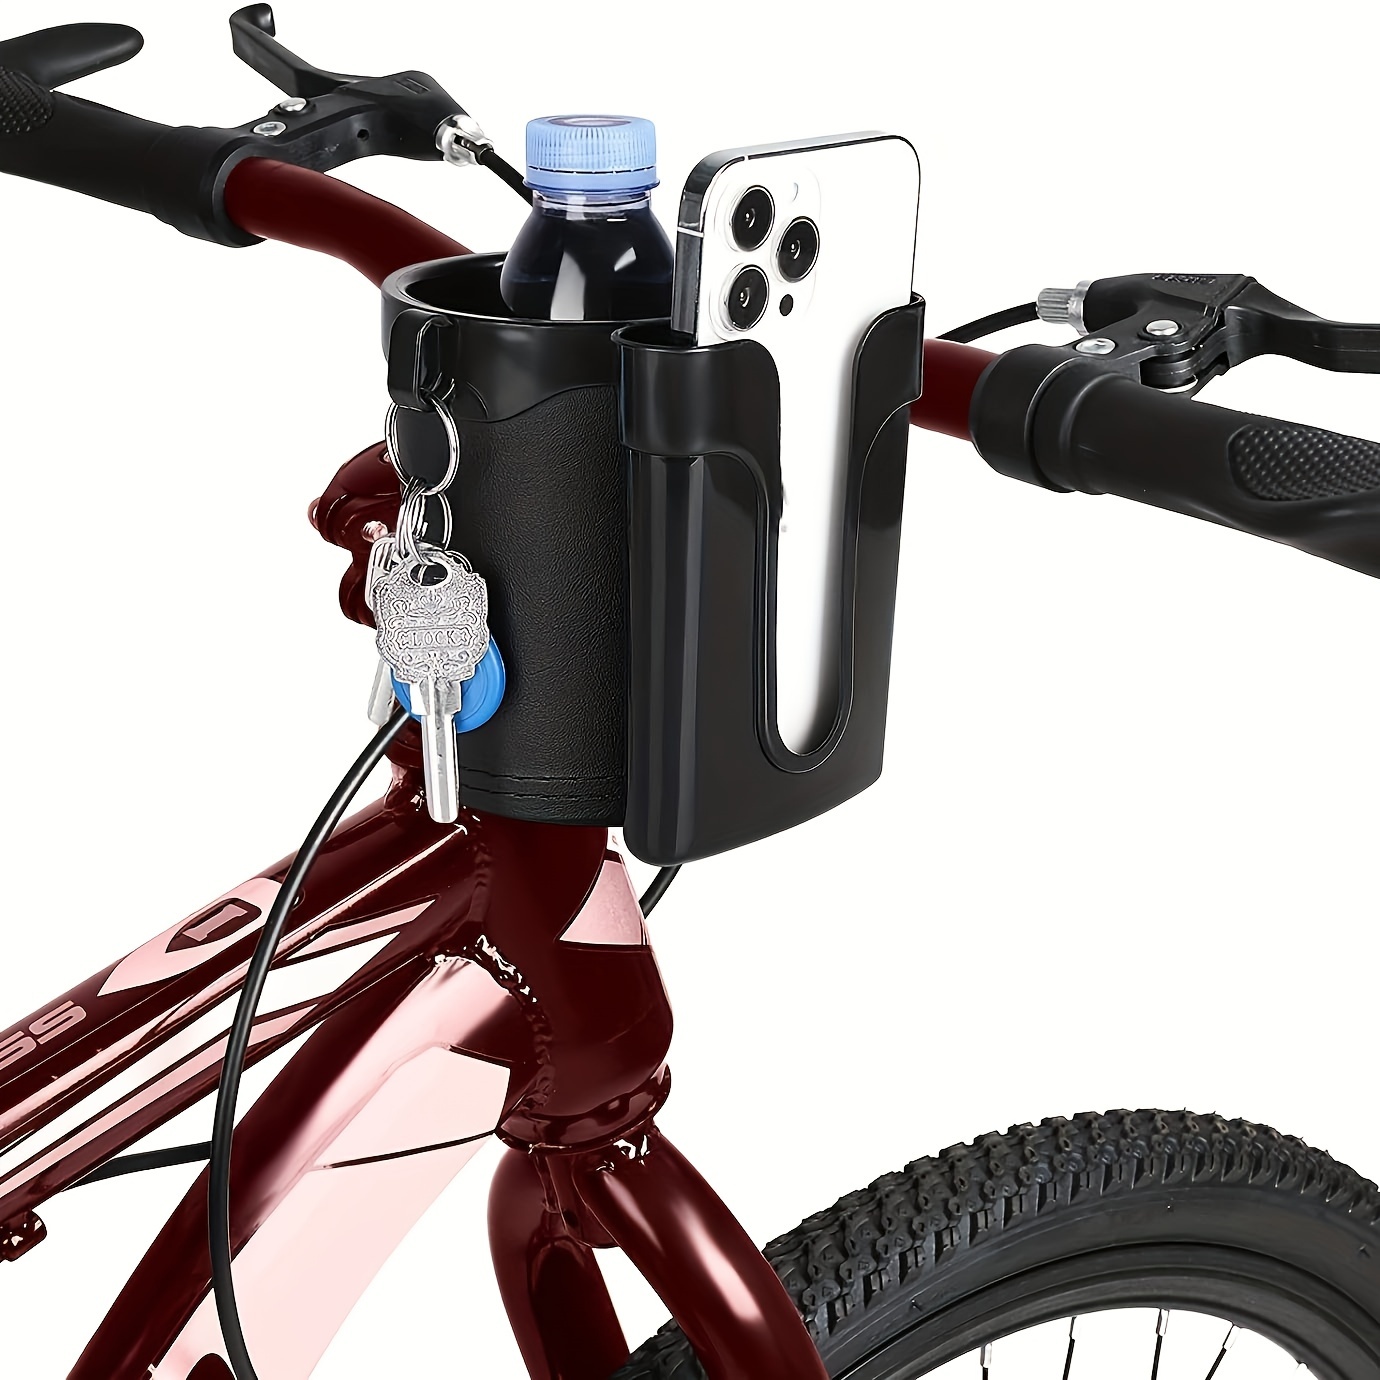 Bike Cup Holder Handlebar Cruiser with Cell Phone Holder Key Holder for  Bicycle Motorcycle Scooter Boat Black